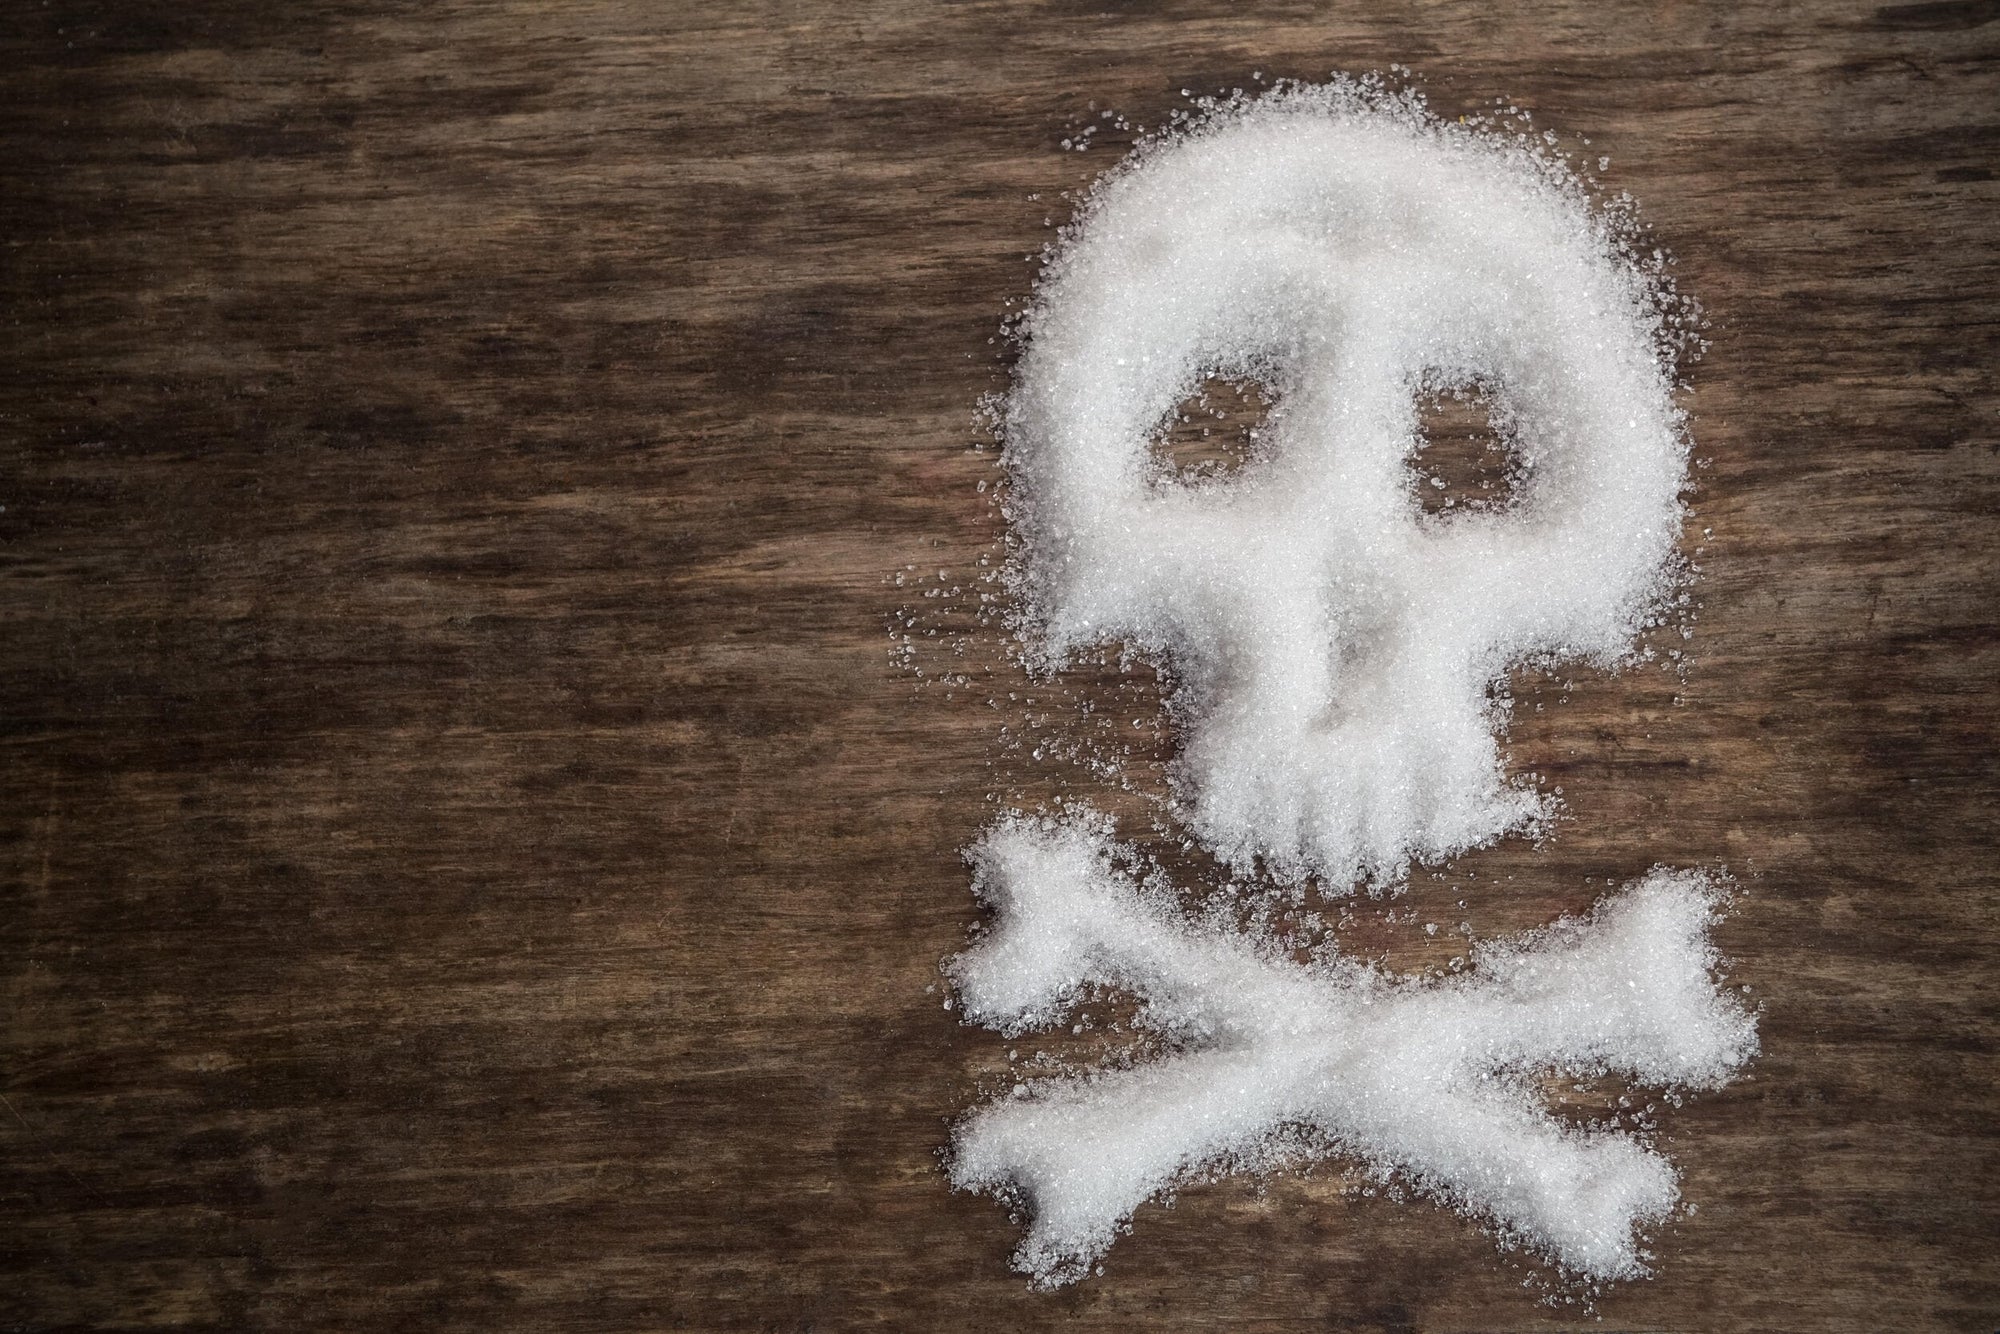 Why is Sugar Bad For You?